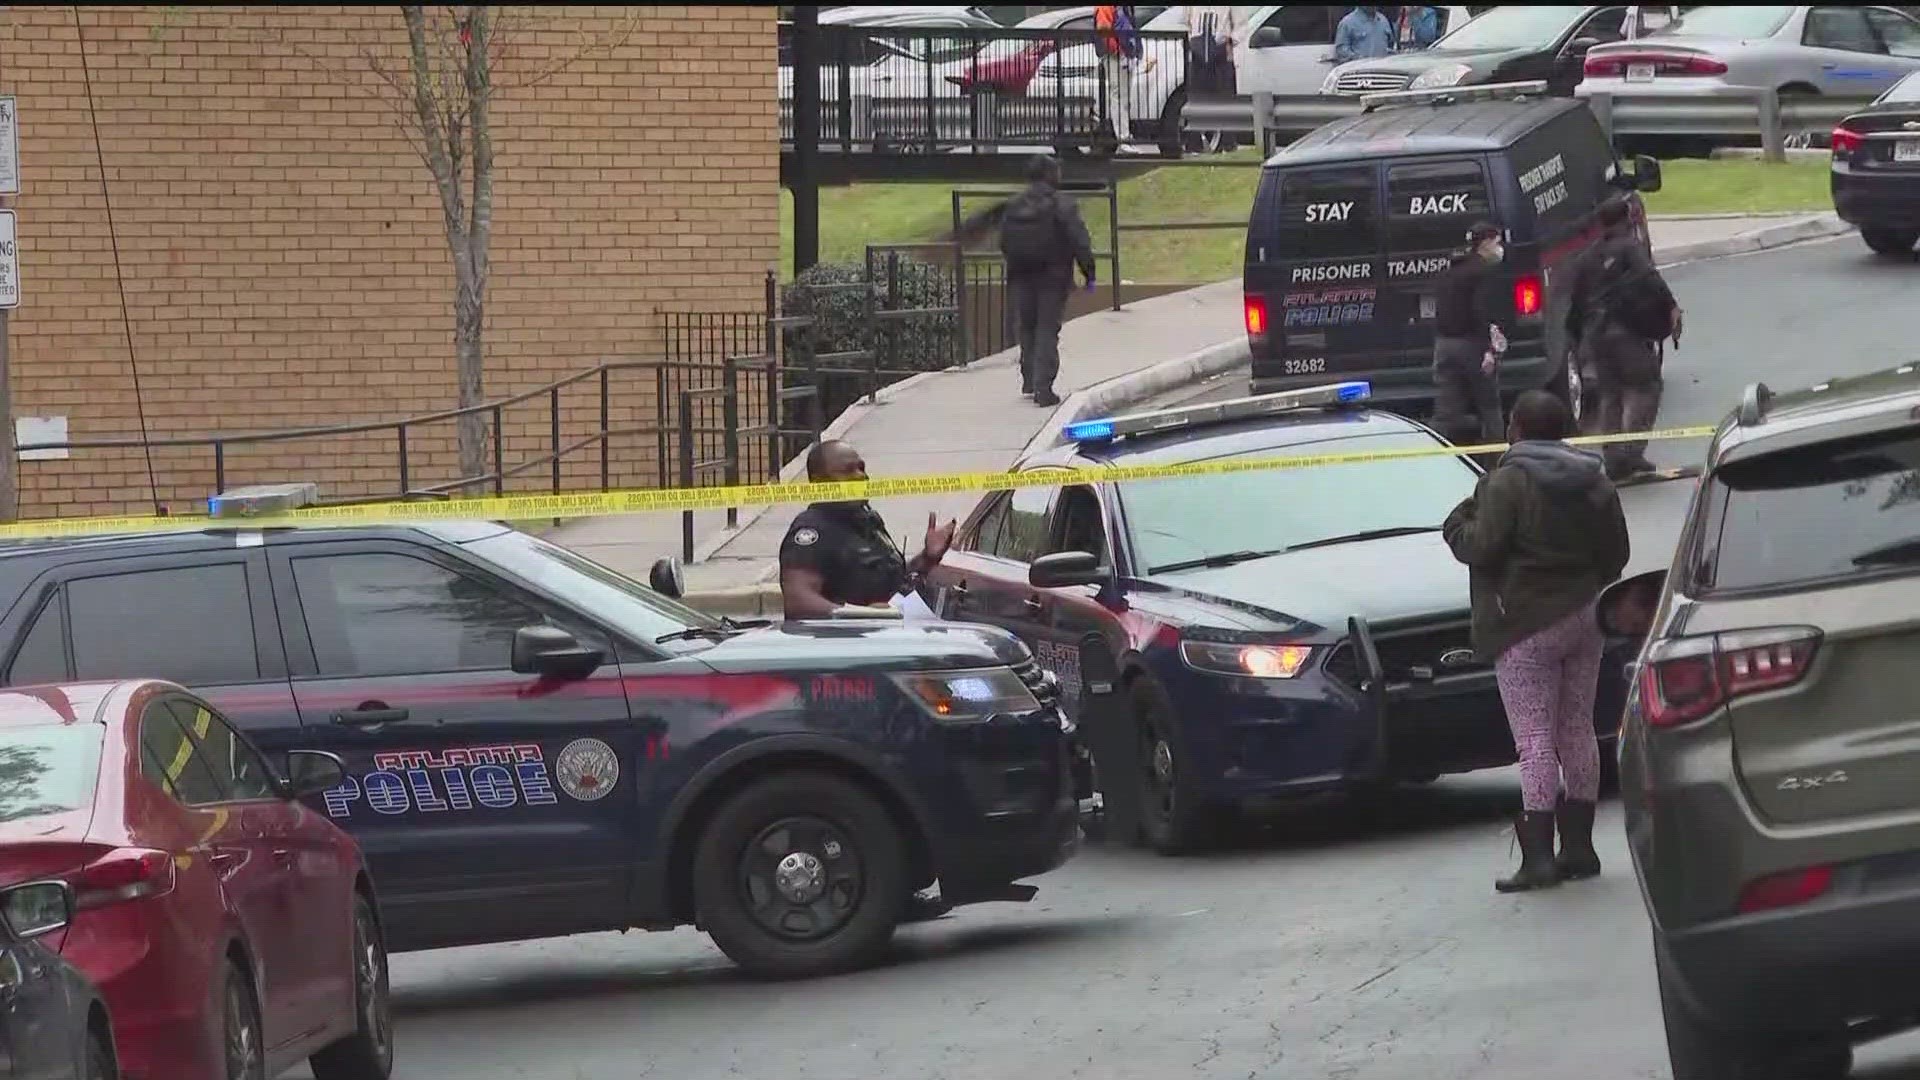 One person is dead and three other people were hurt after a shooting at an apartment complex near a school Monday afternoon, Atlanta Police said.